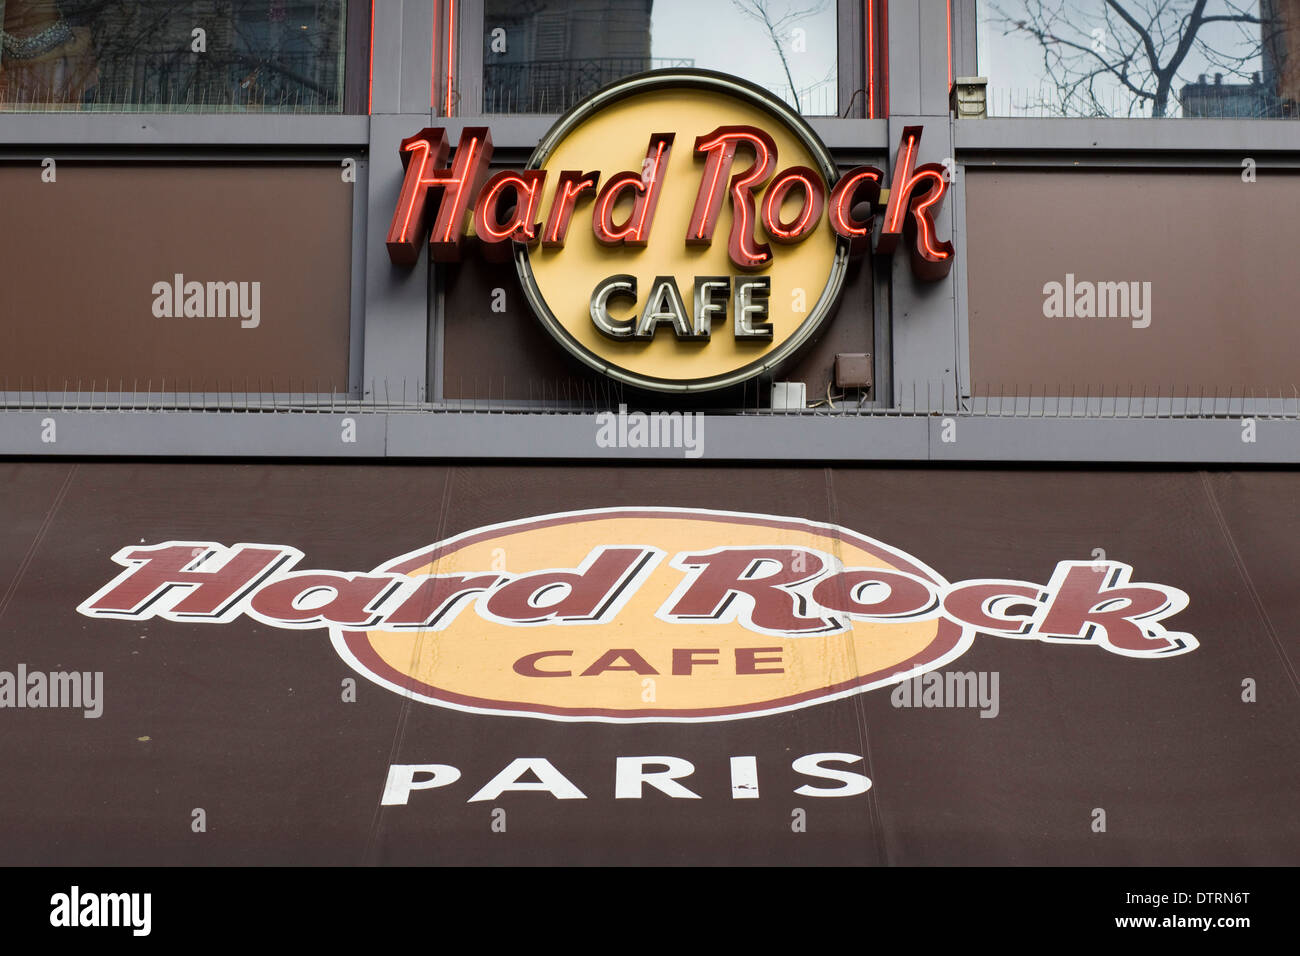 Sign and  Awning Entrance to The Hard Rock Café in Paris France Stock Photo